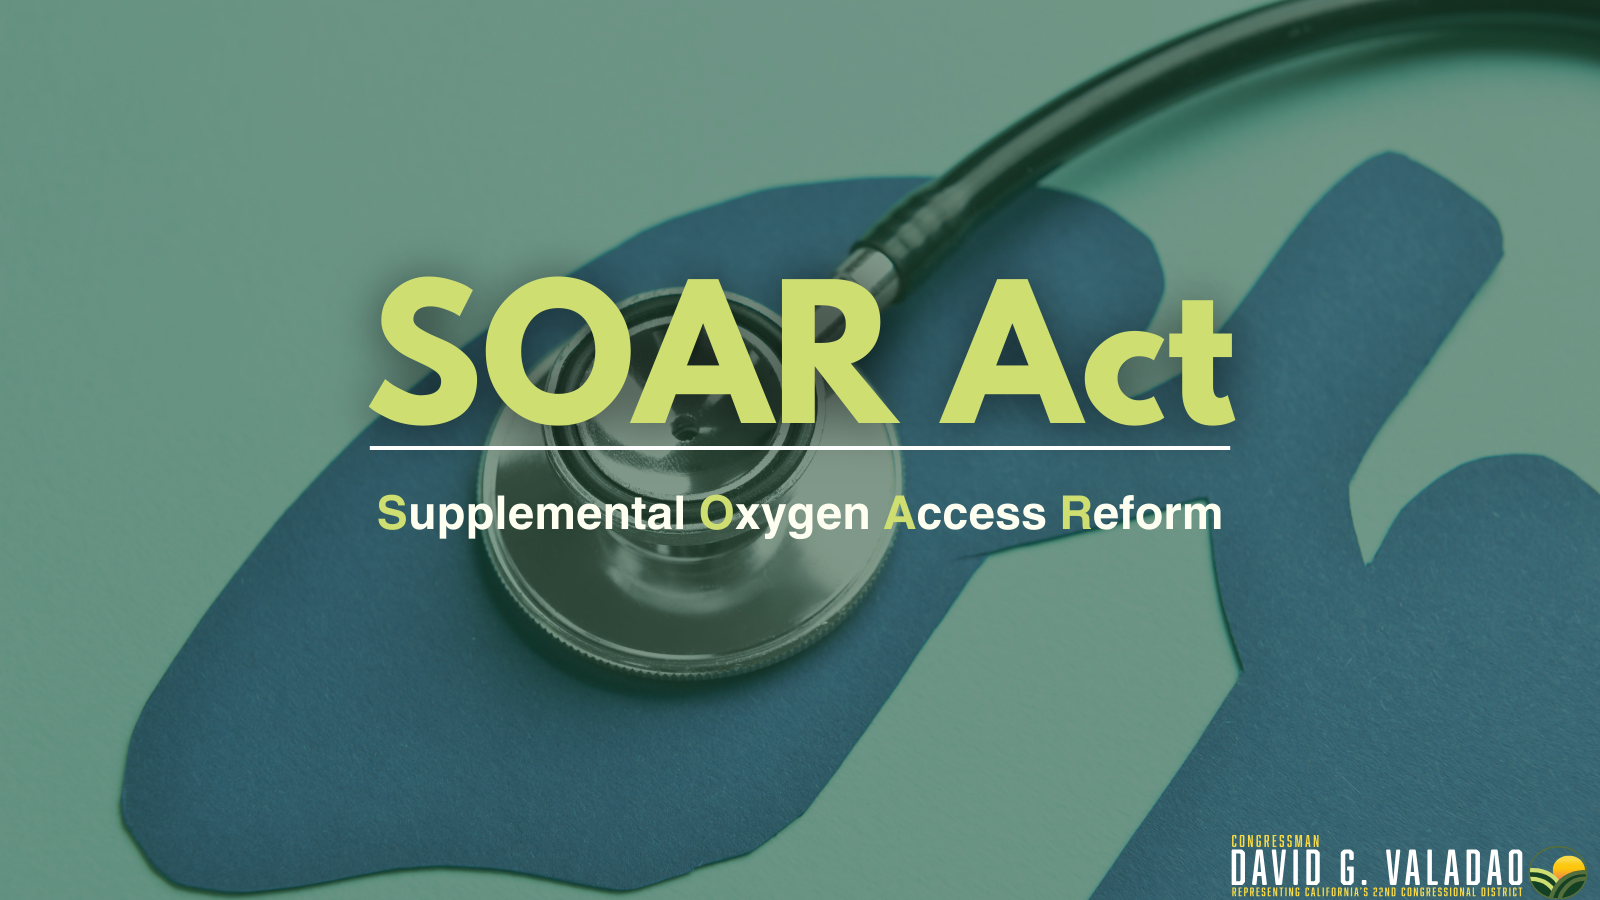 Rep. Valadao Introduces the SOAR Act